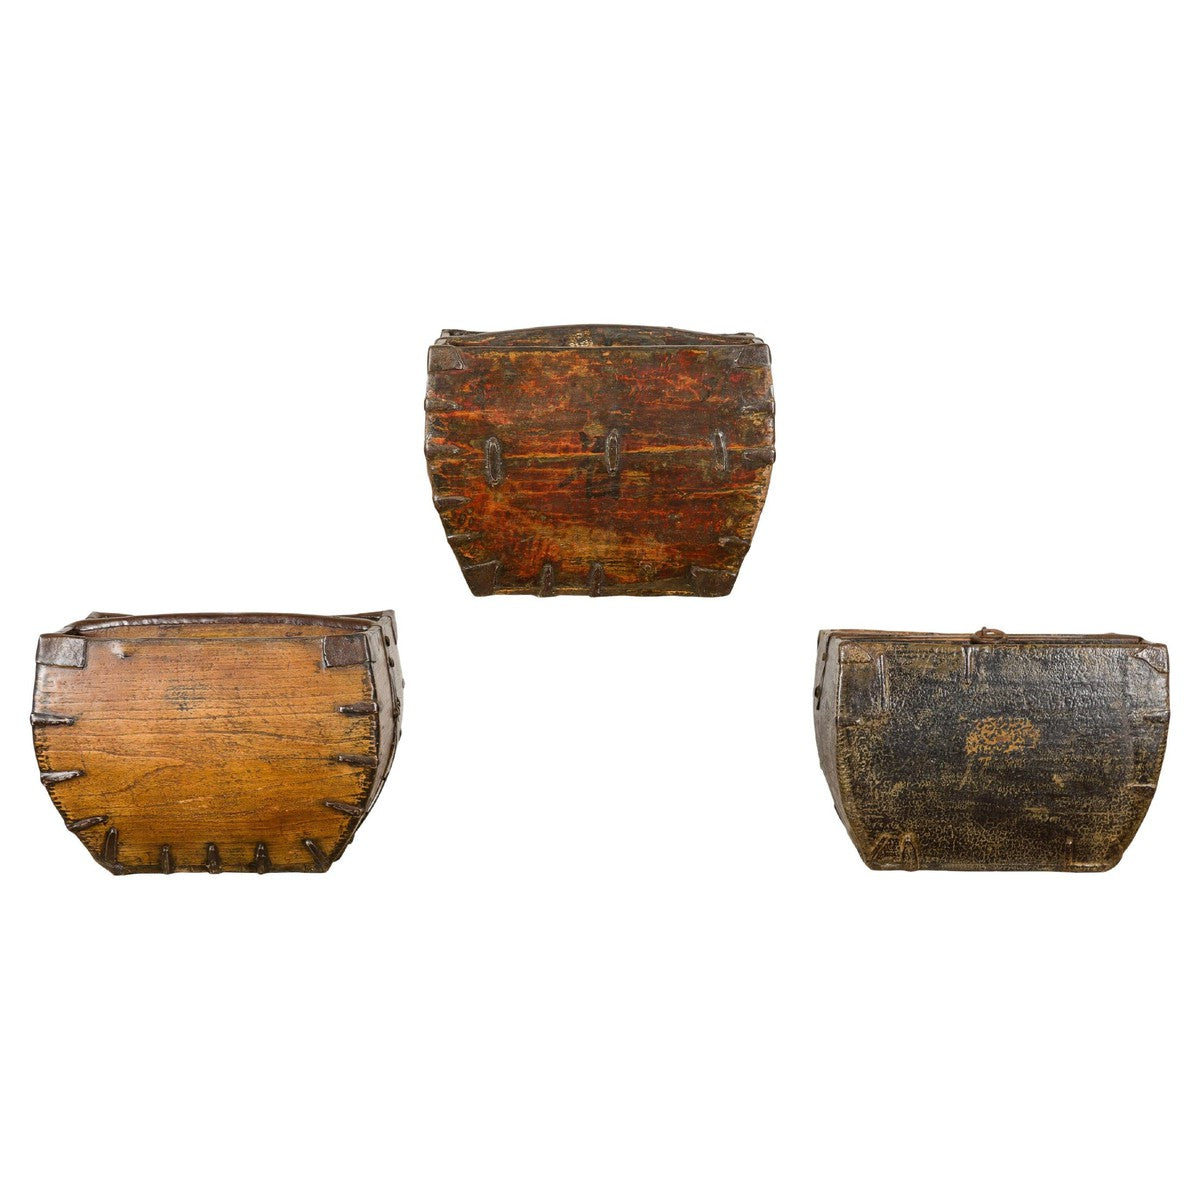 Wooden Rice Measure Baskets with Handles and Metal Accents, Sold Each-YN7917 ABC-1. Asian & Chinese Furniture, Art, Antiques, Vintage Home Décor for sale at FEA Home